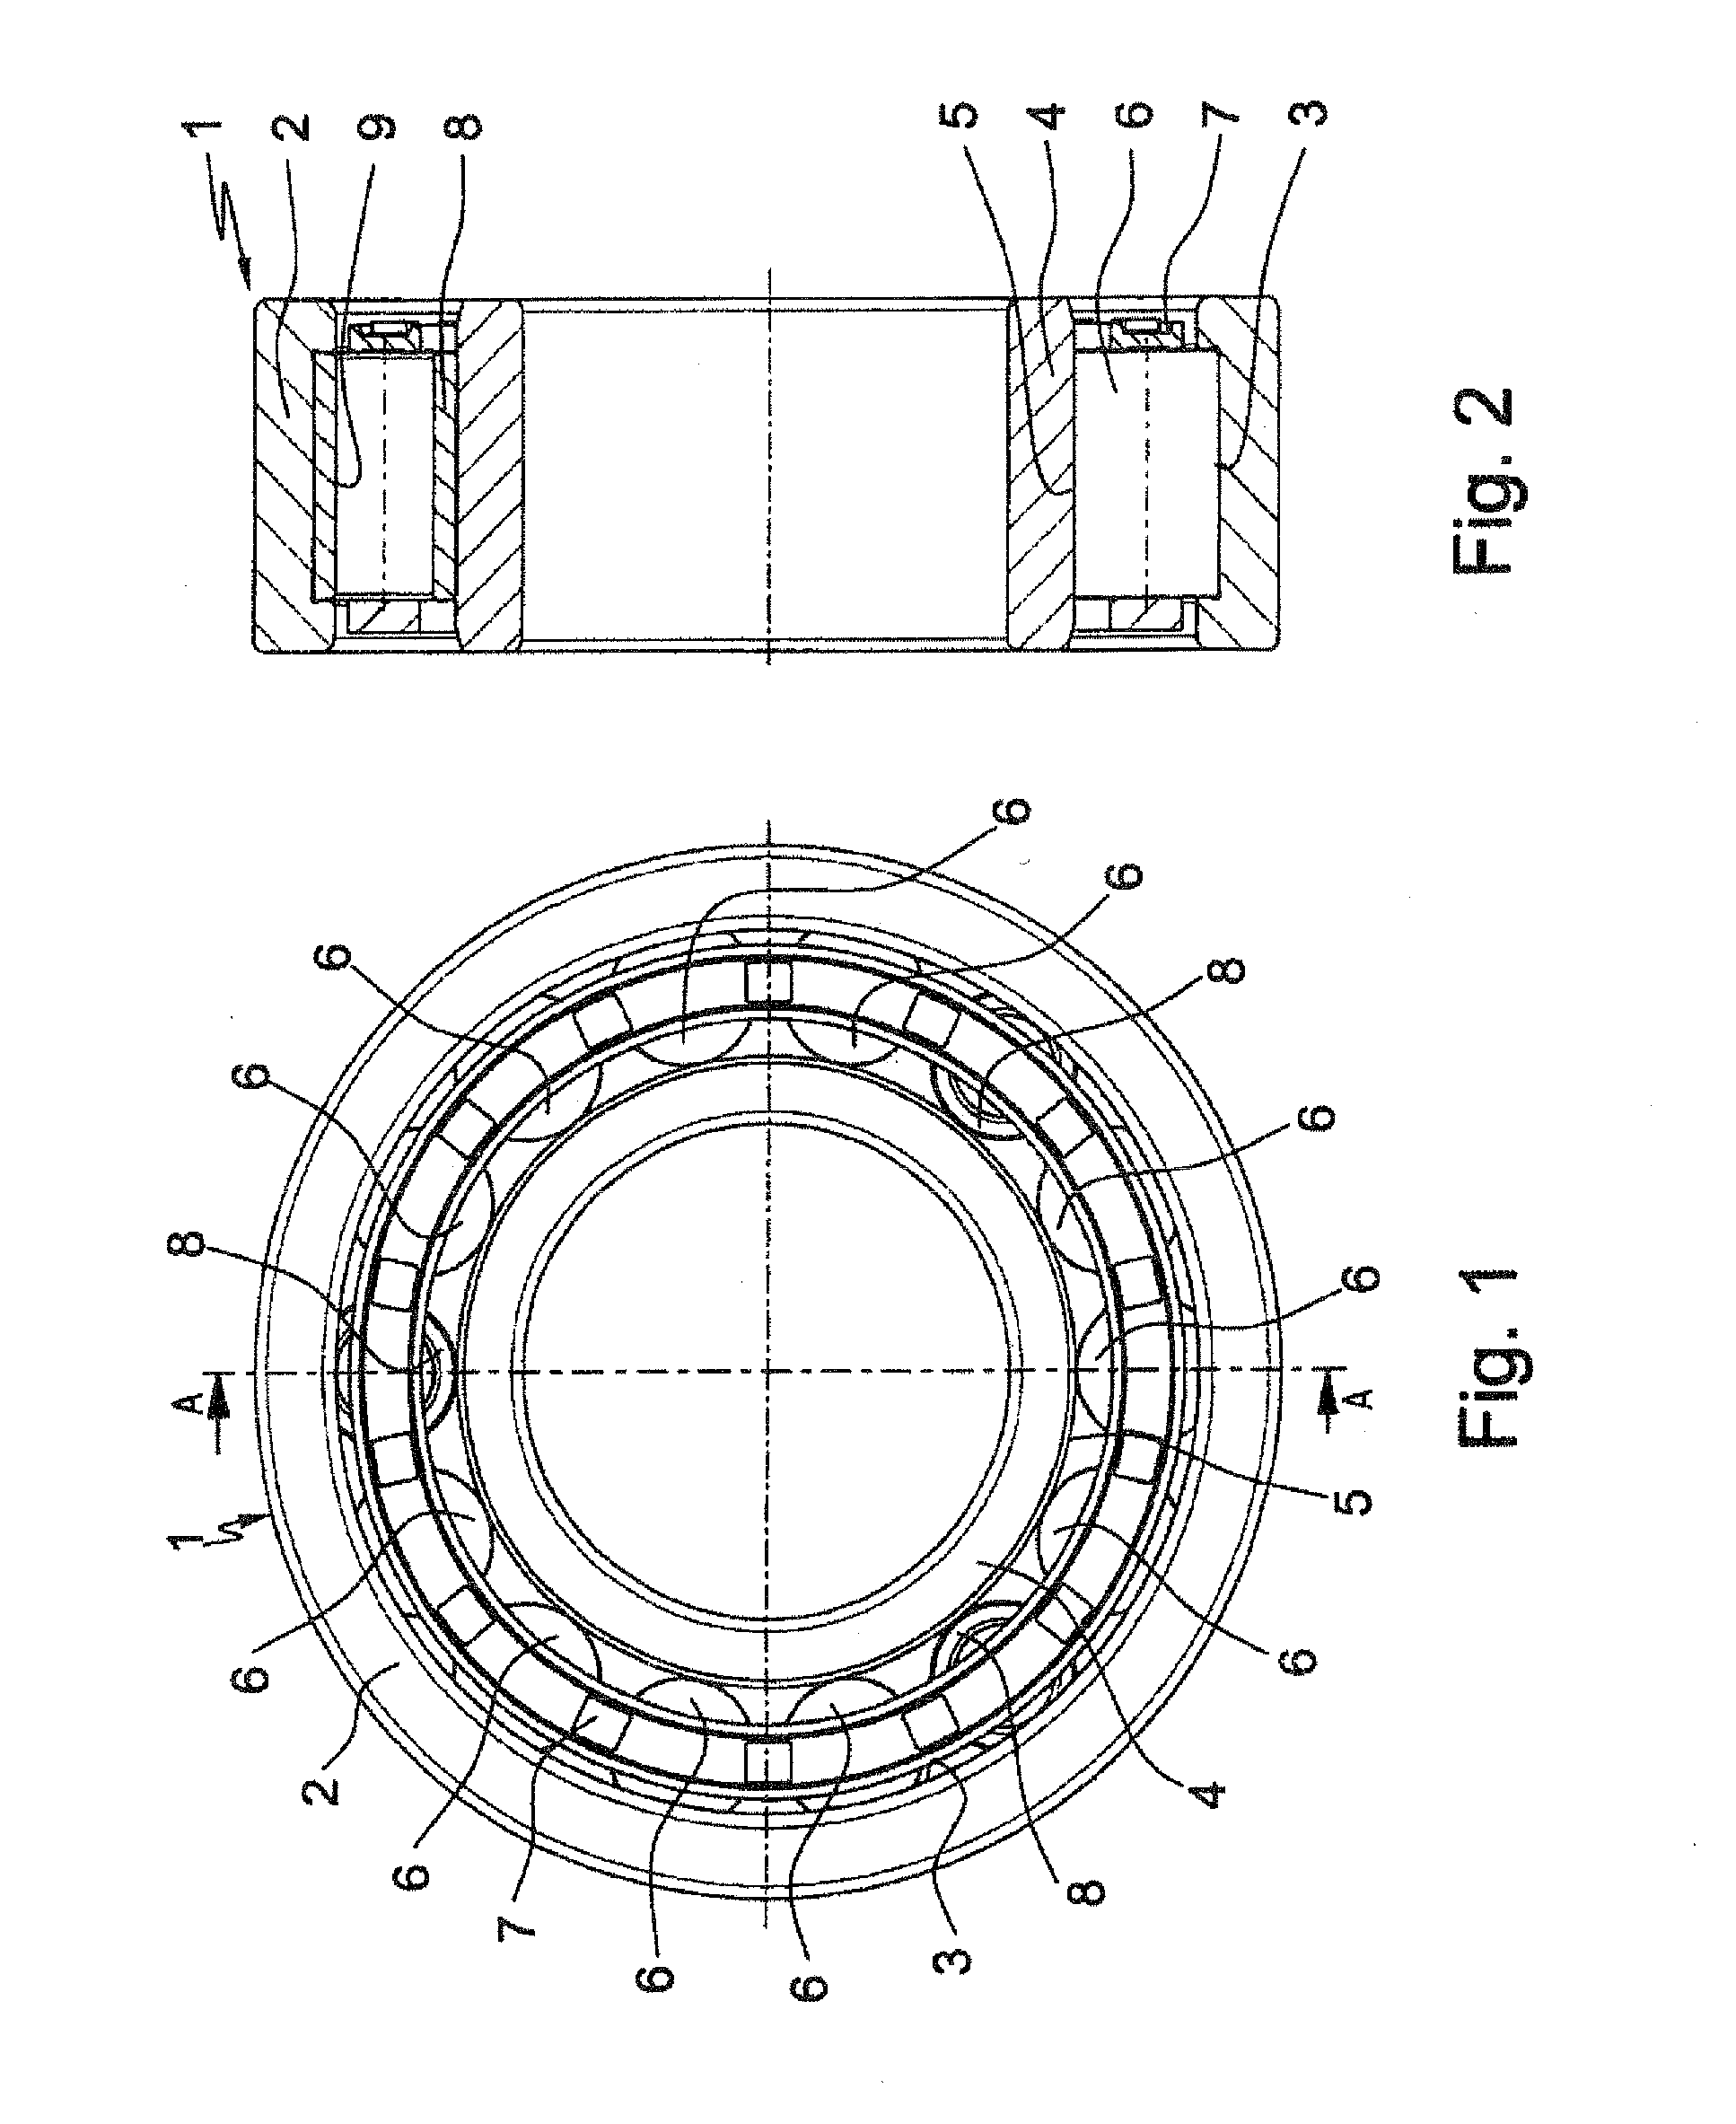 Radial roller bearing, in particular for storing shafts in wind turbine transmissions